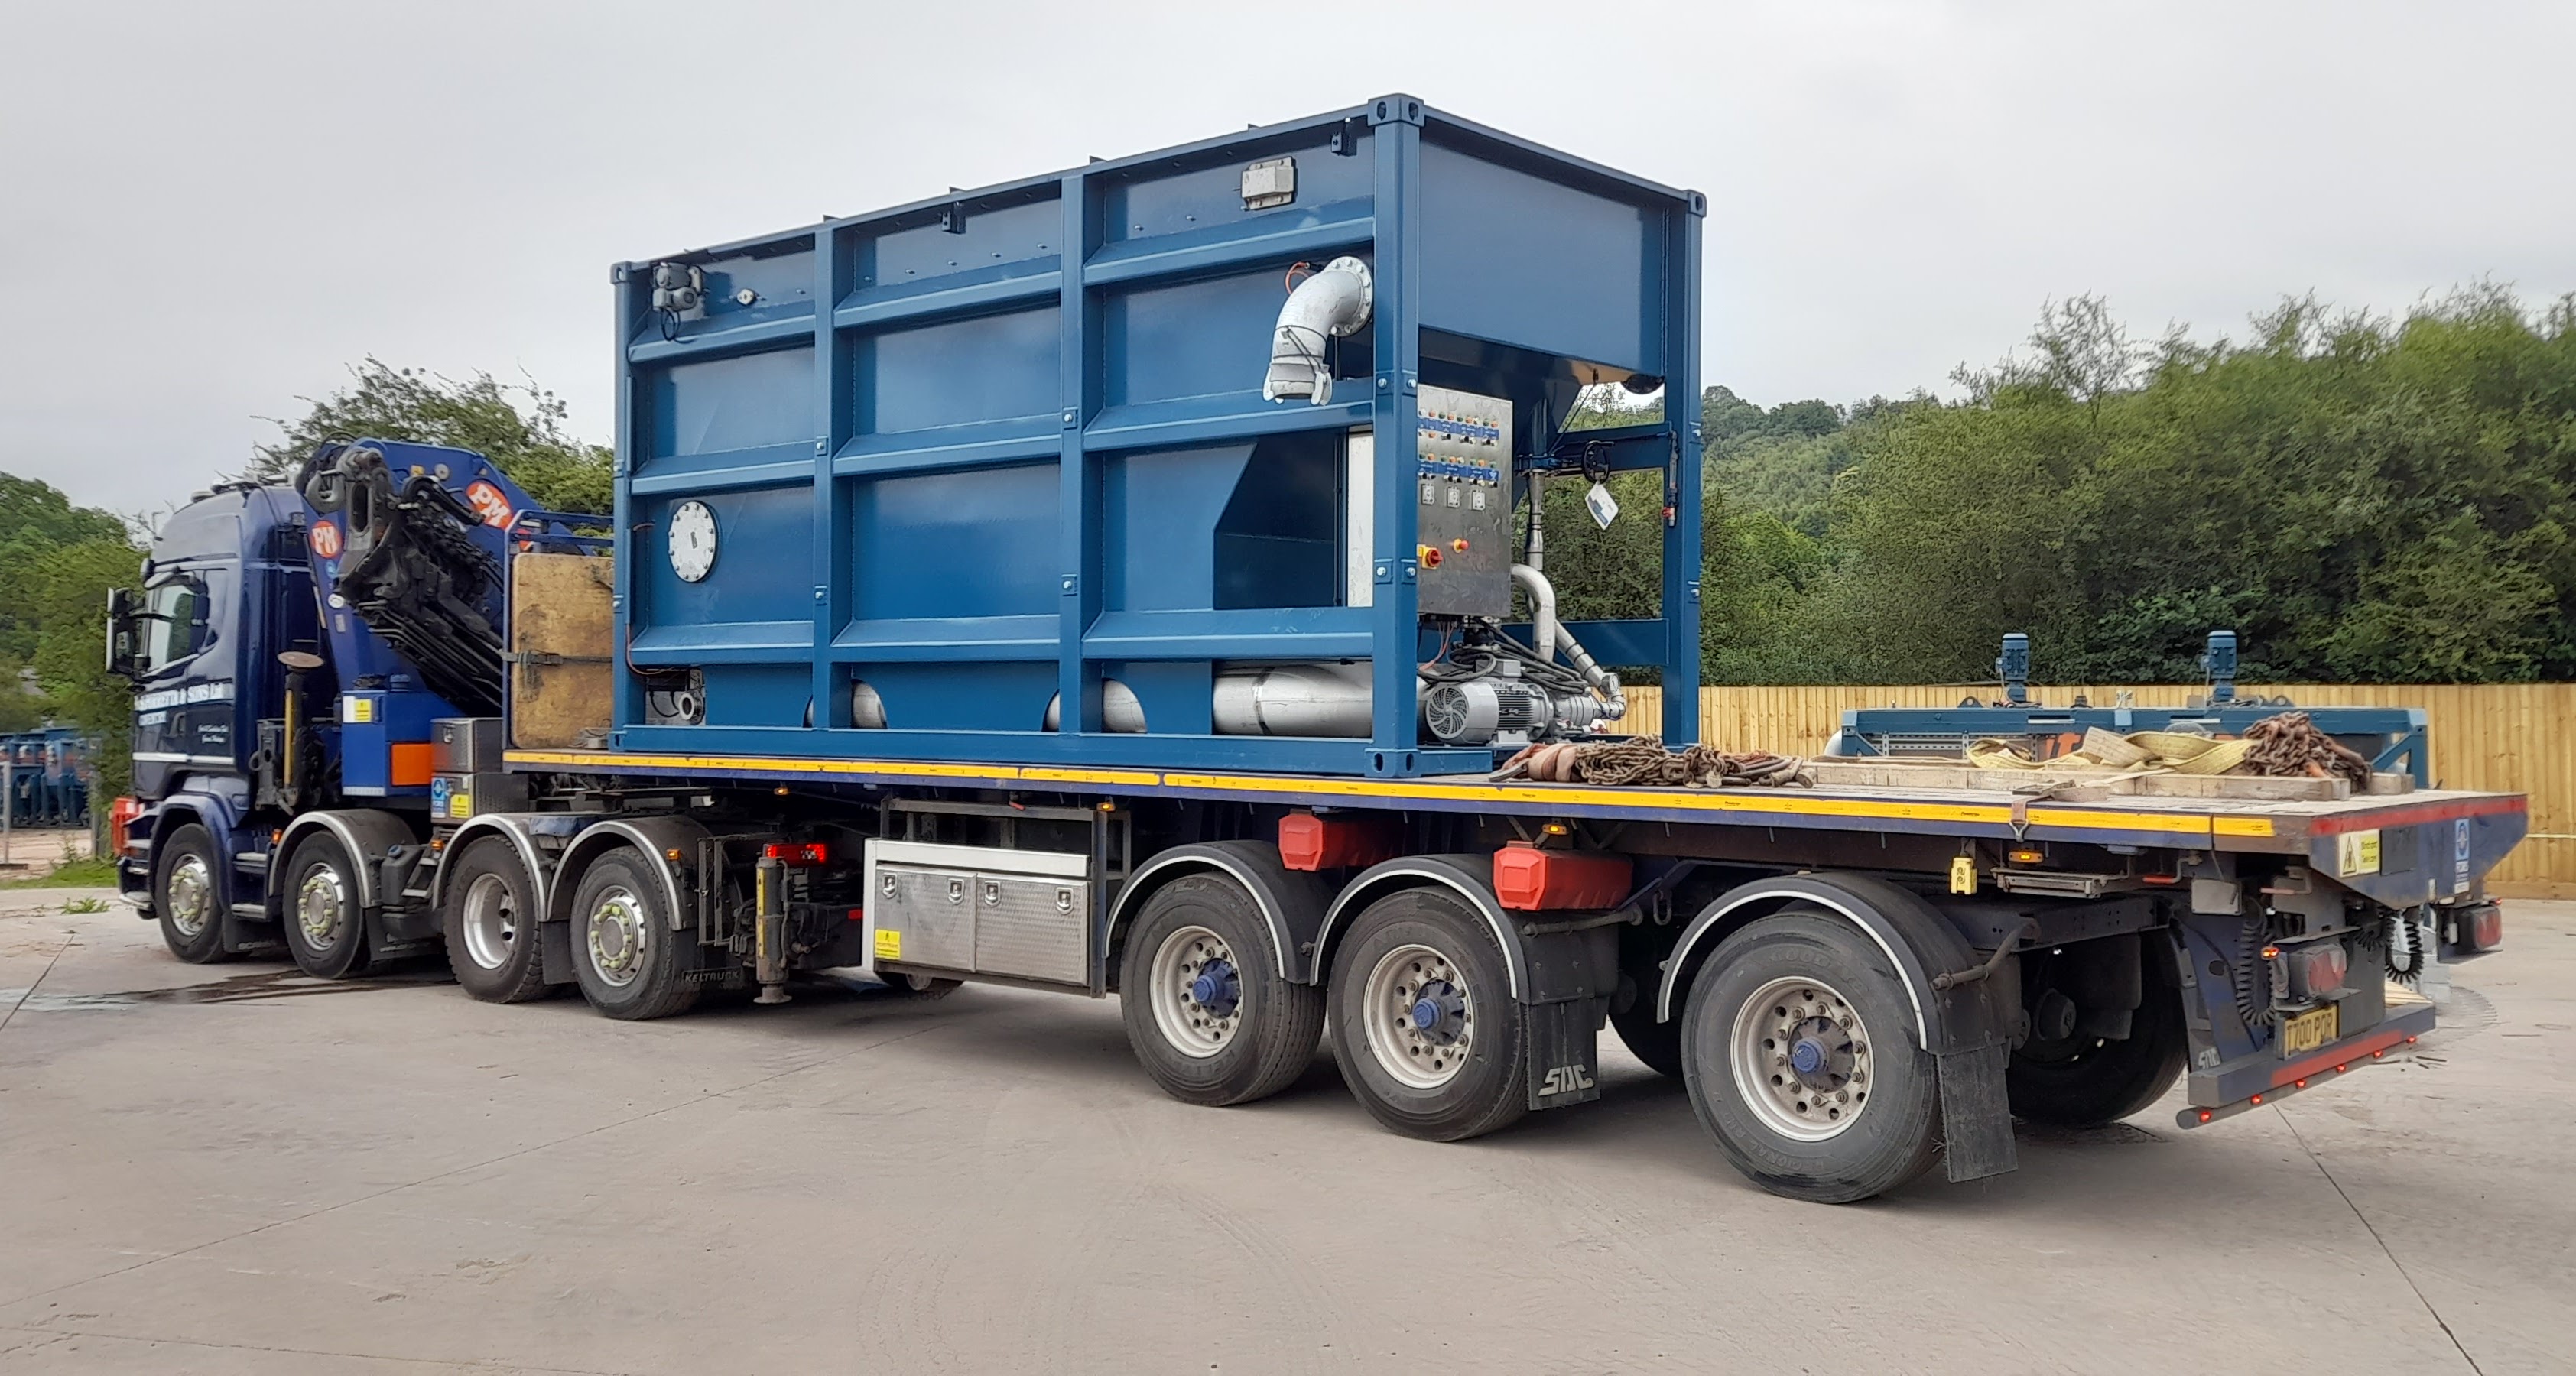 DAF systems have become increasingly popular in the wastewater industry.